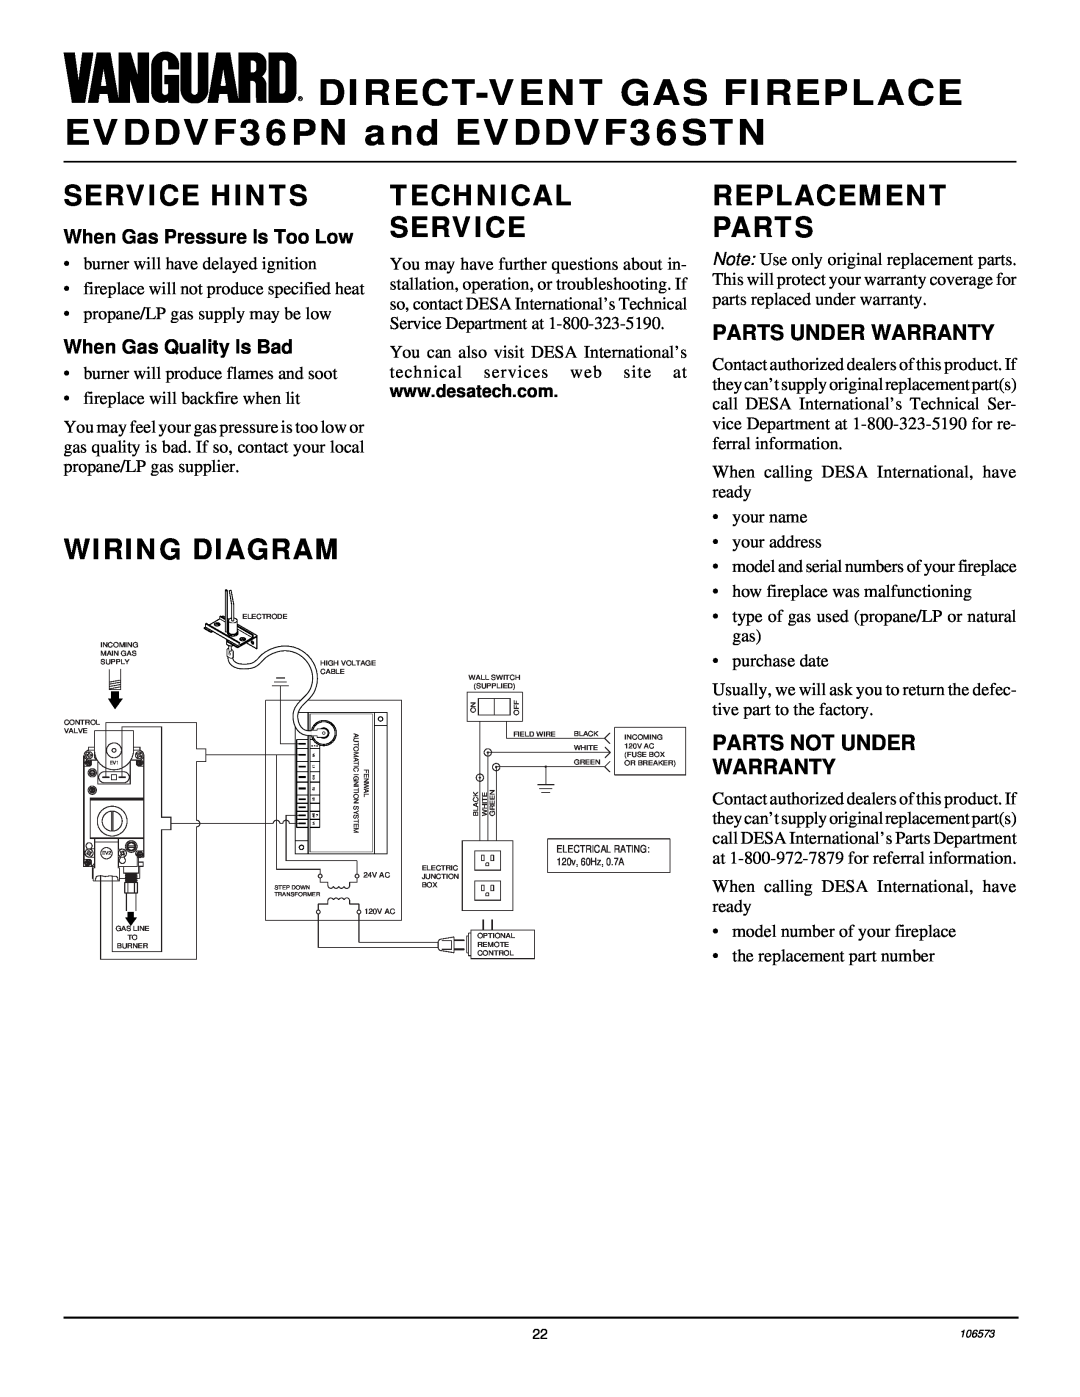 Desa EVDDVF36PN, EVDDVF36STN Service Hints, Technical Service, Replacement Parts, Wiring Diagram, Parts Under Warranty 